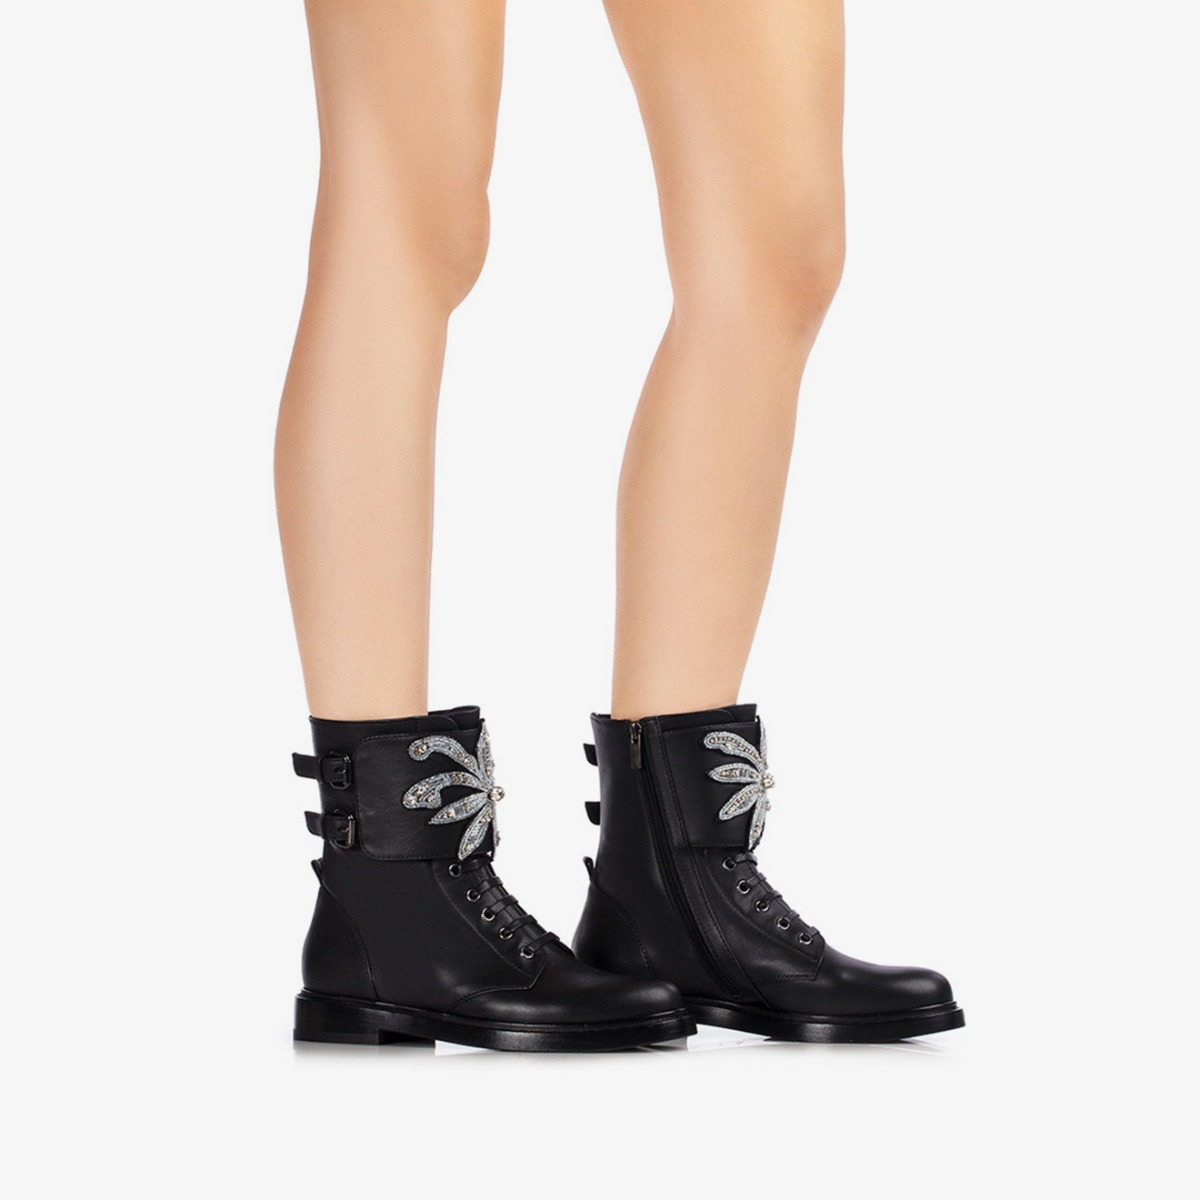 KALLAS ANKLE BOOT - Le Silla official outlet